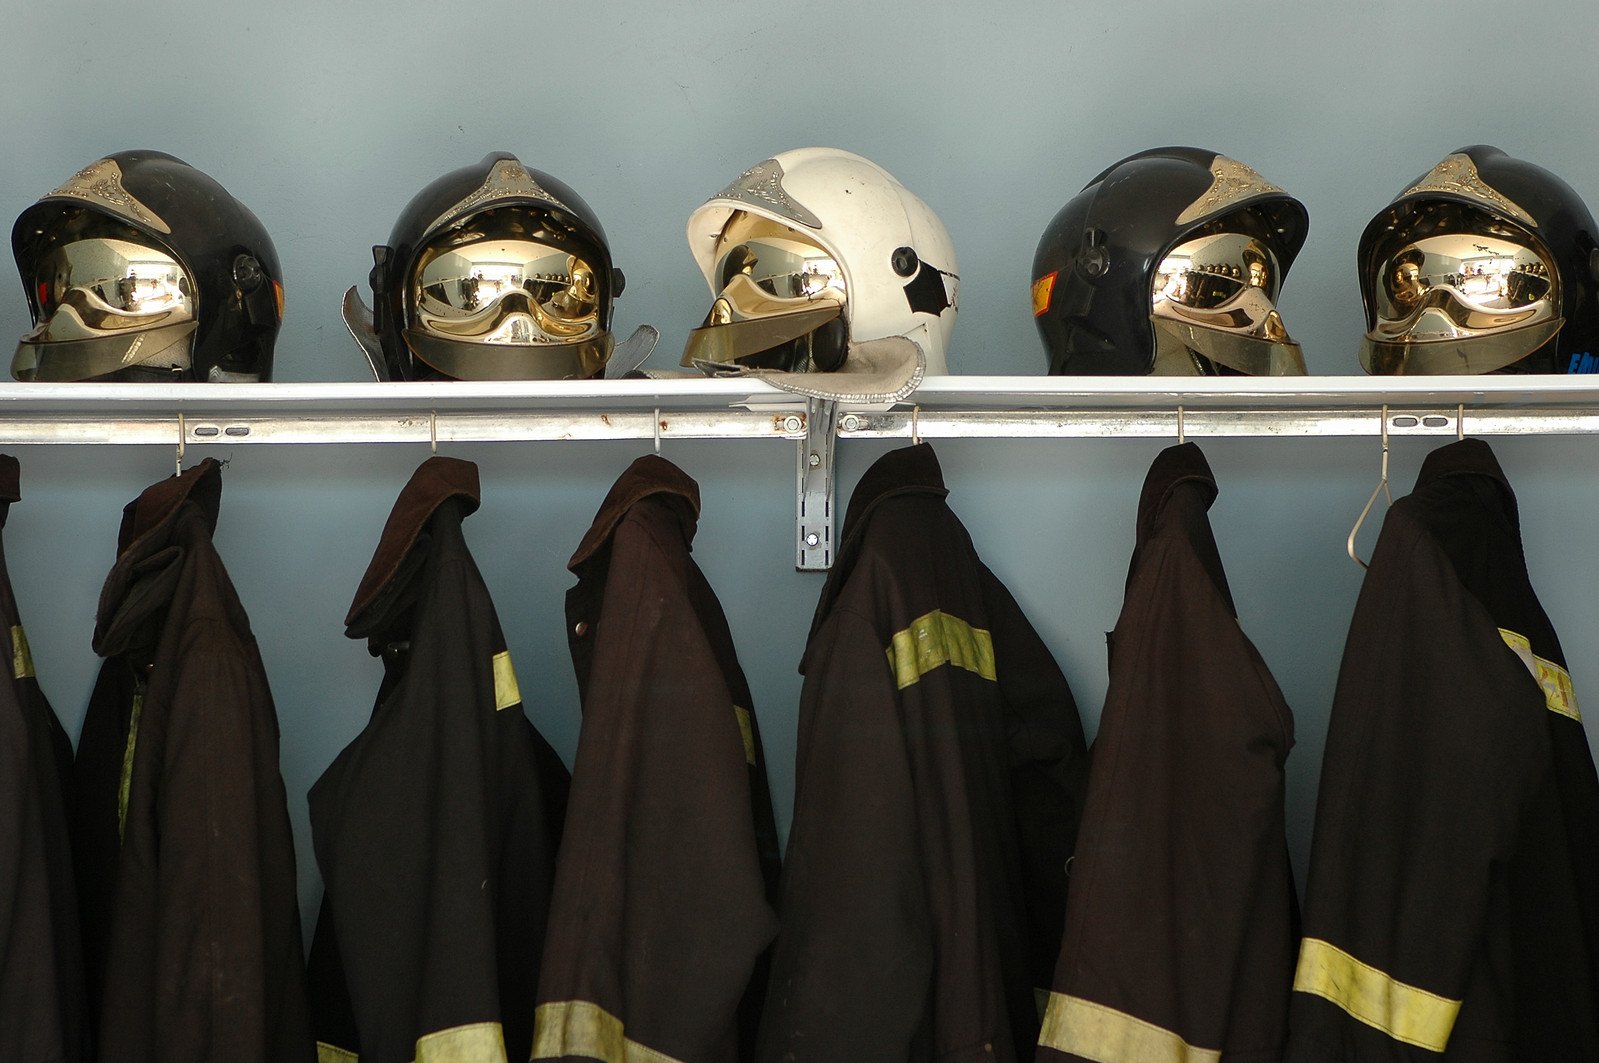 several different types of helmets hang on a metal rail